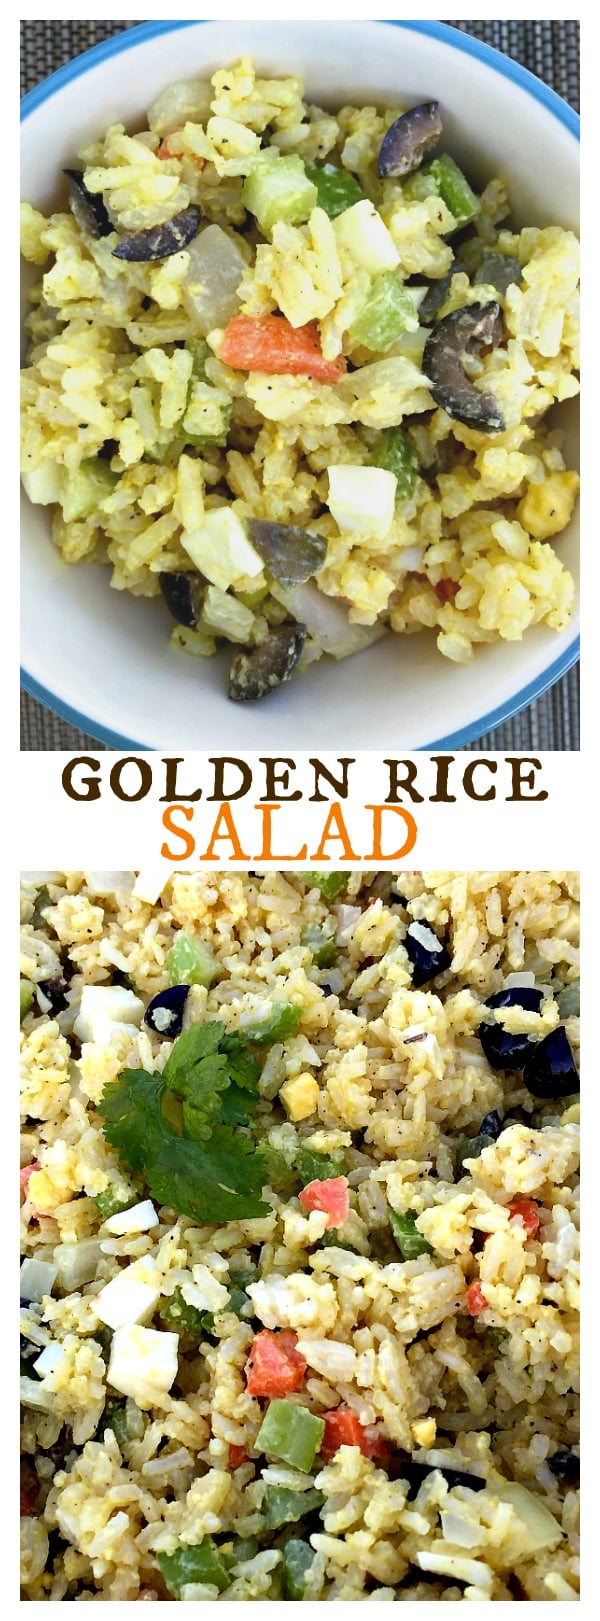 Golden Rice Salad - delicious side or potluck salad with potato salad flavors!